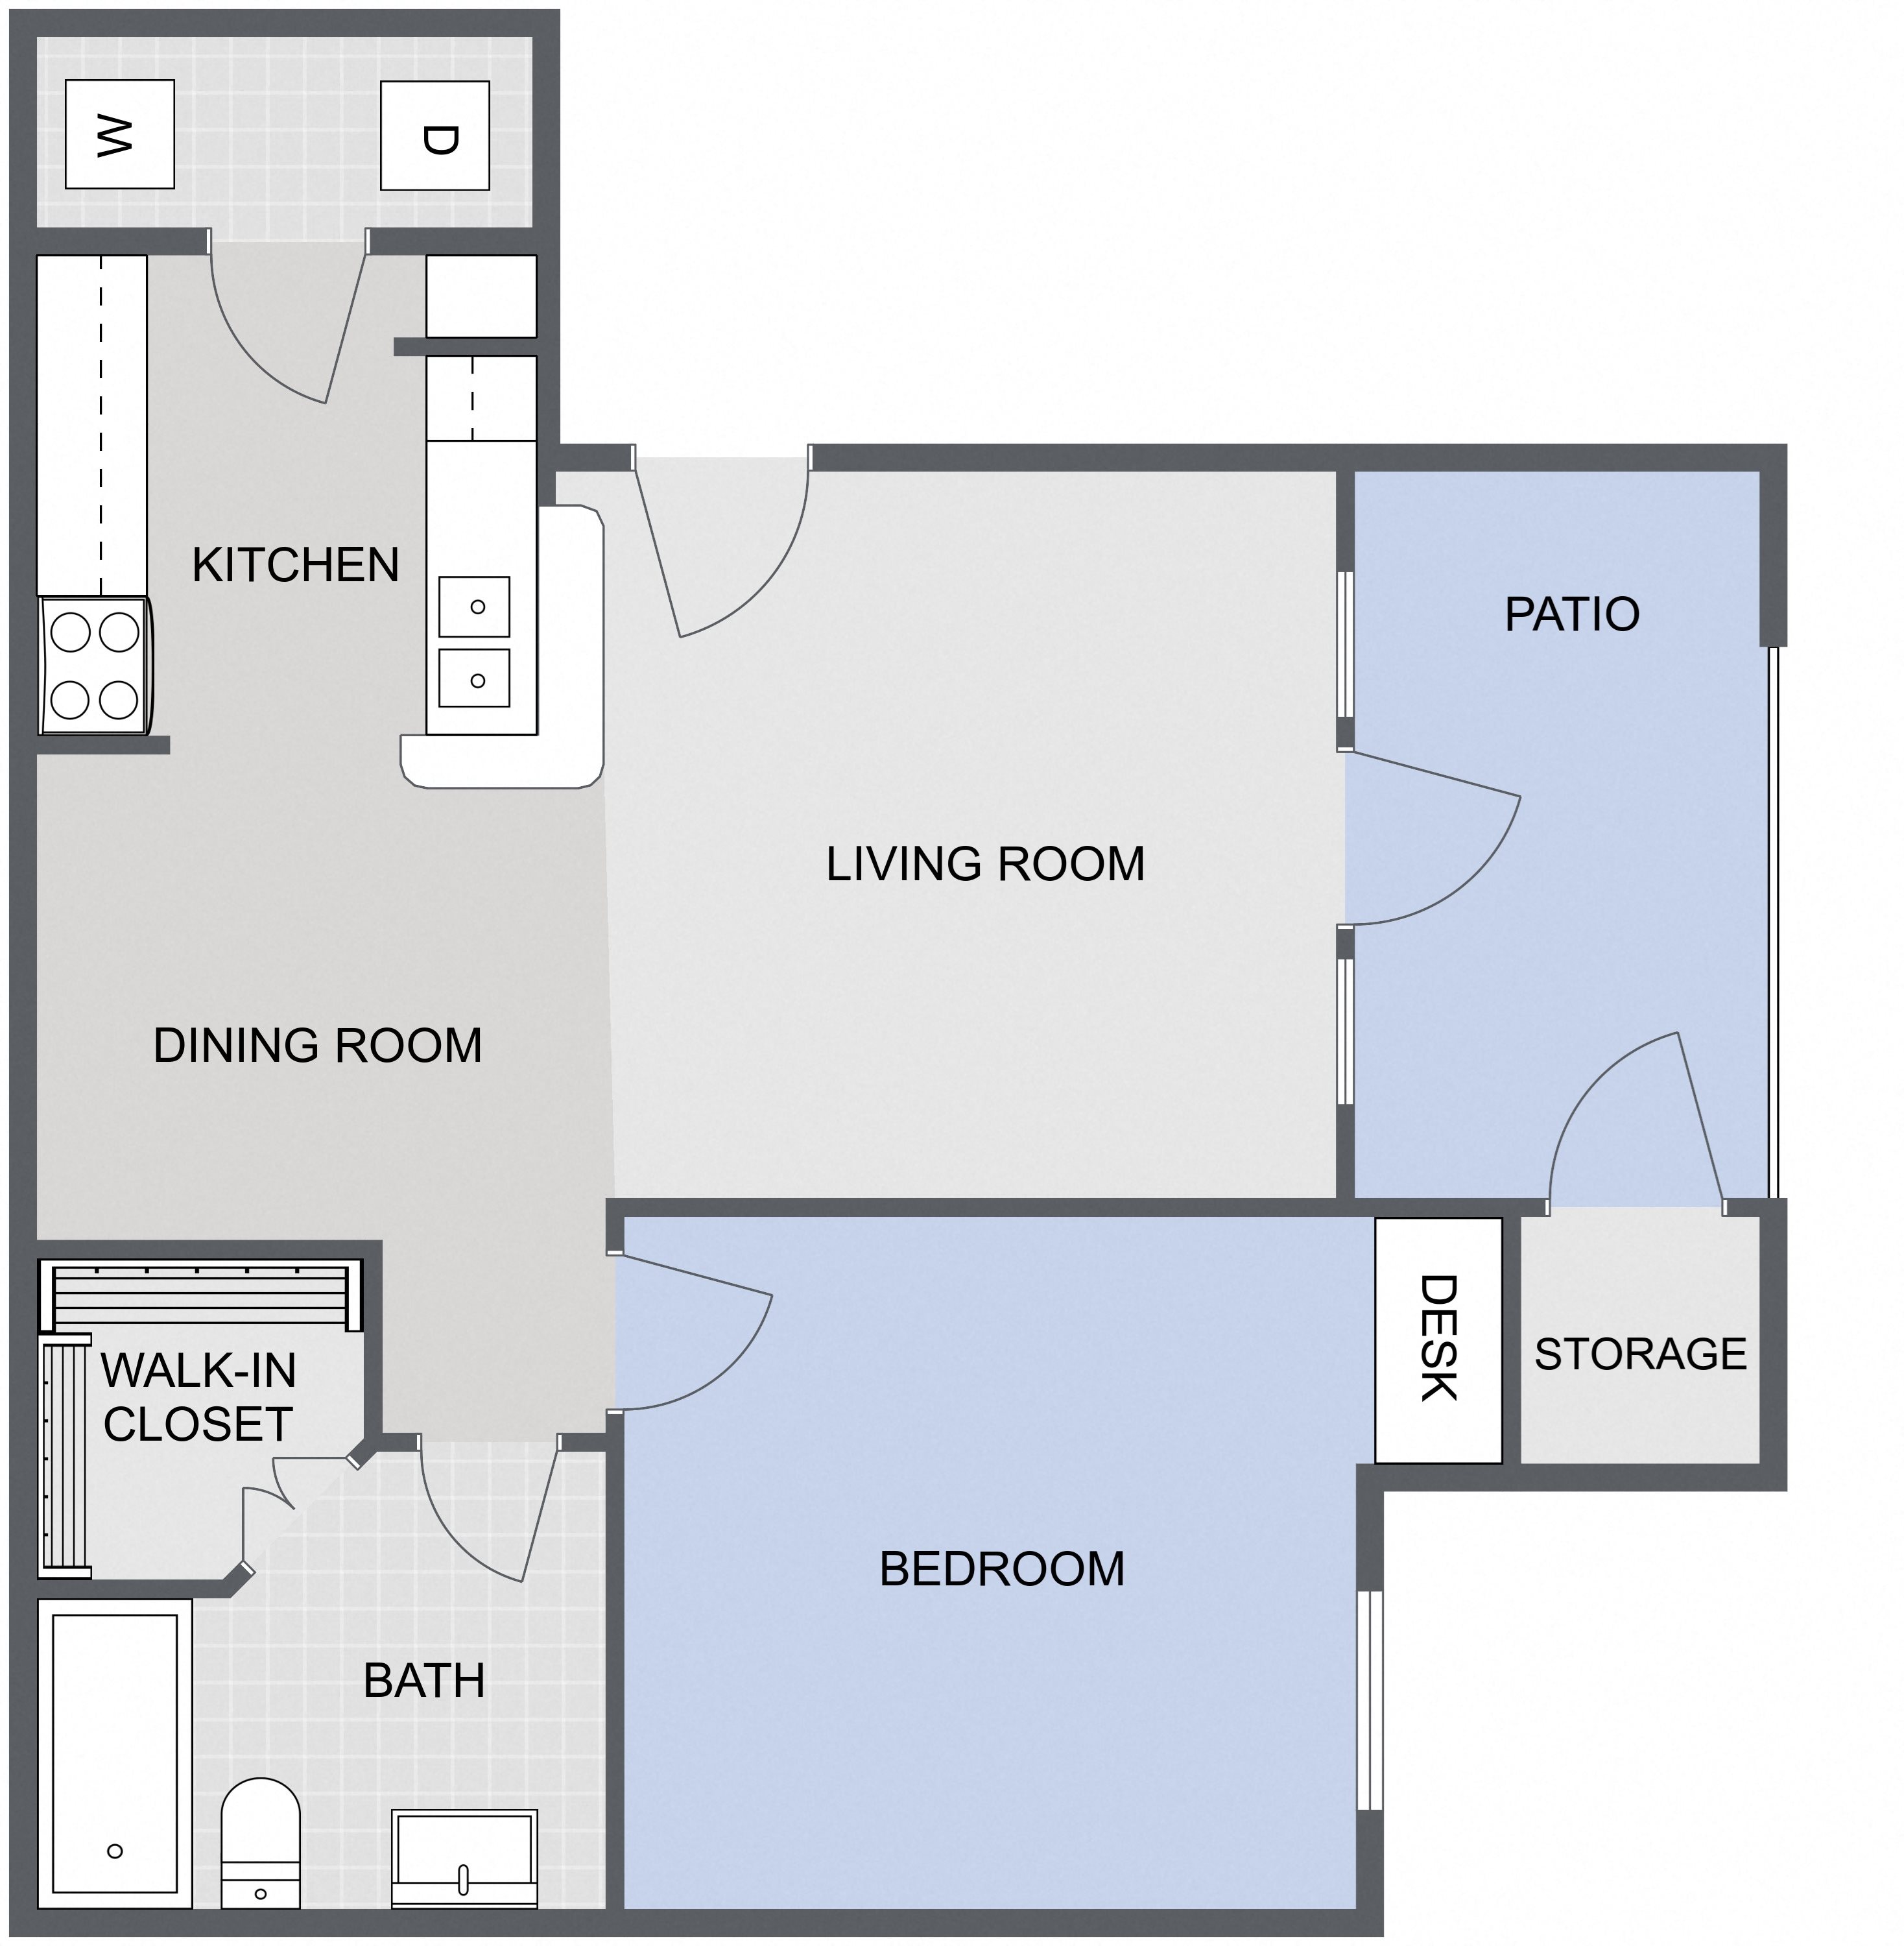 Floor Plans of The Edgewater at Klein in Spring, TX